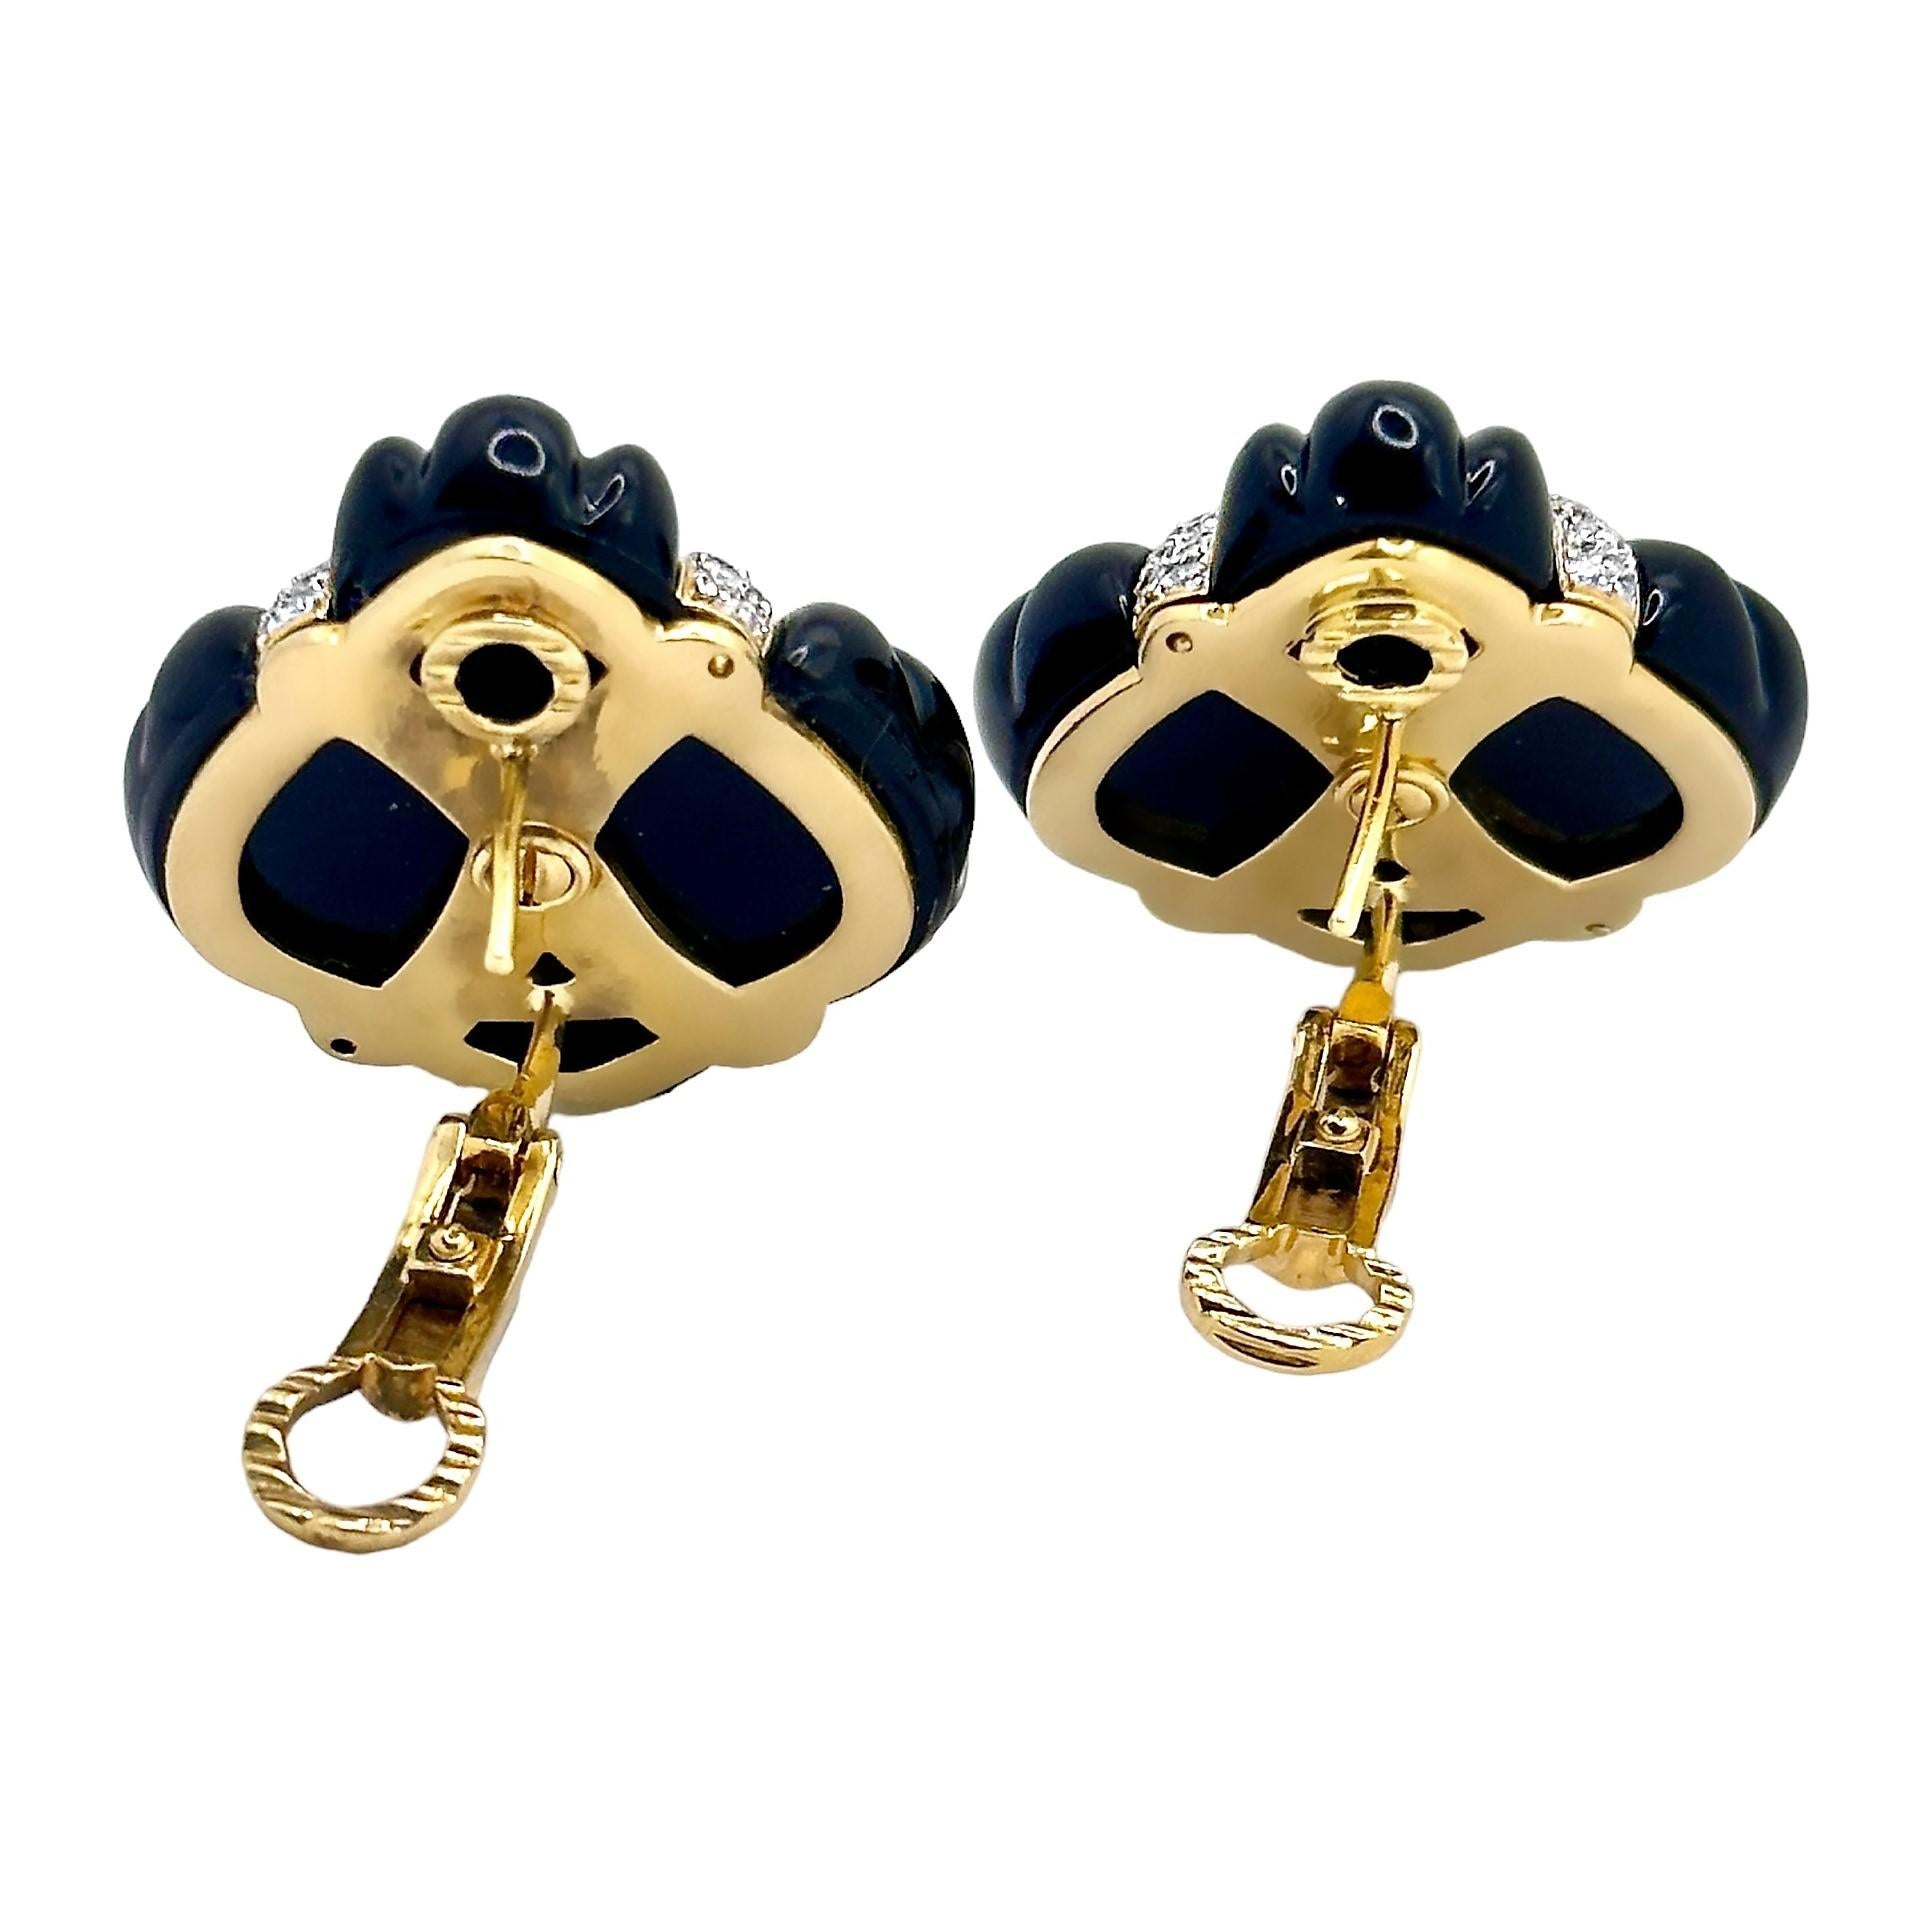 Brilliant Cut Exquisitely Designed Gold, Diamond and Fluted Onyx Fashion Earrings 1.25 Inches